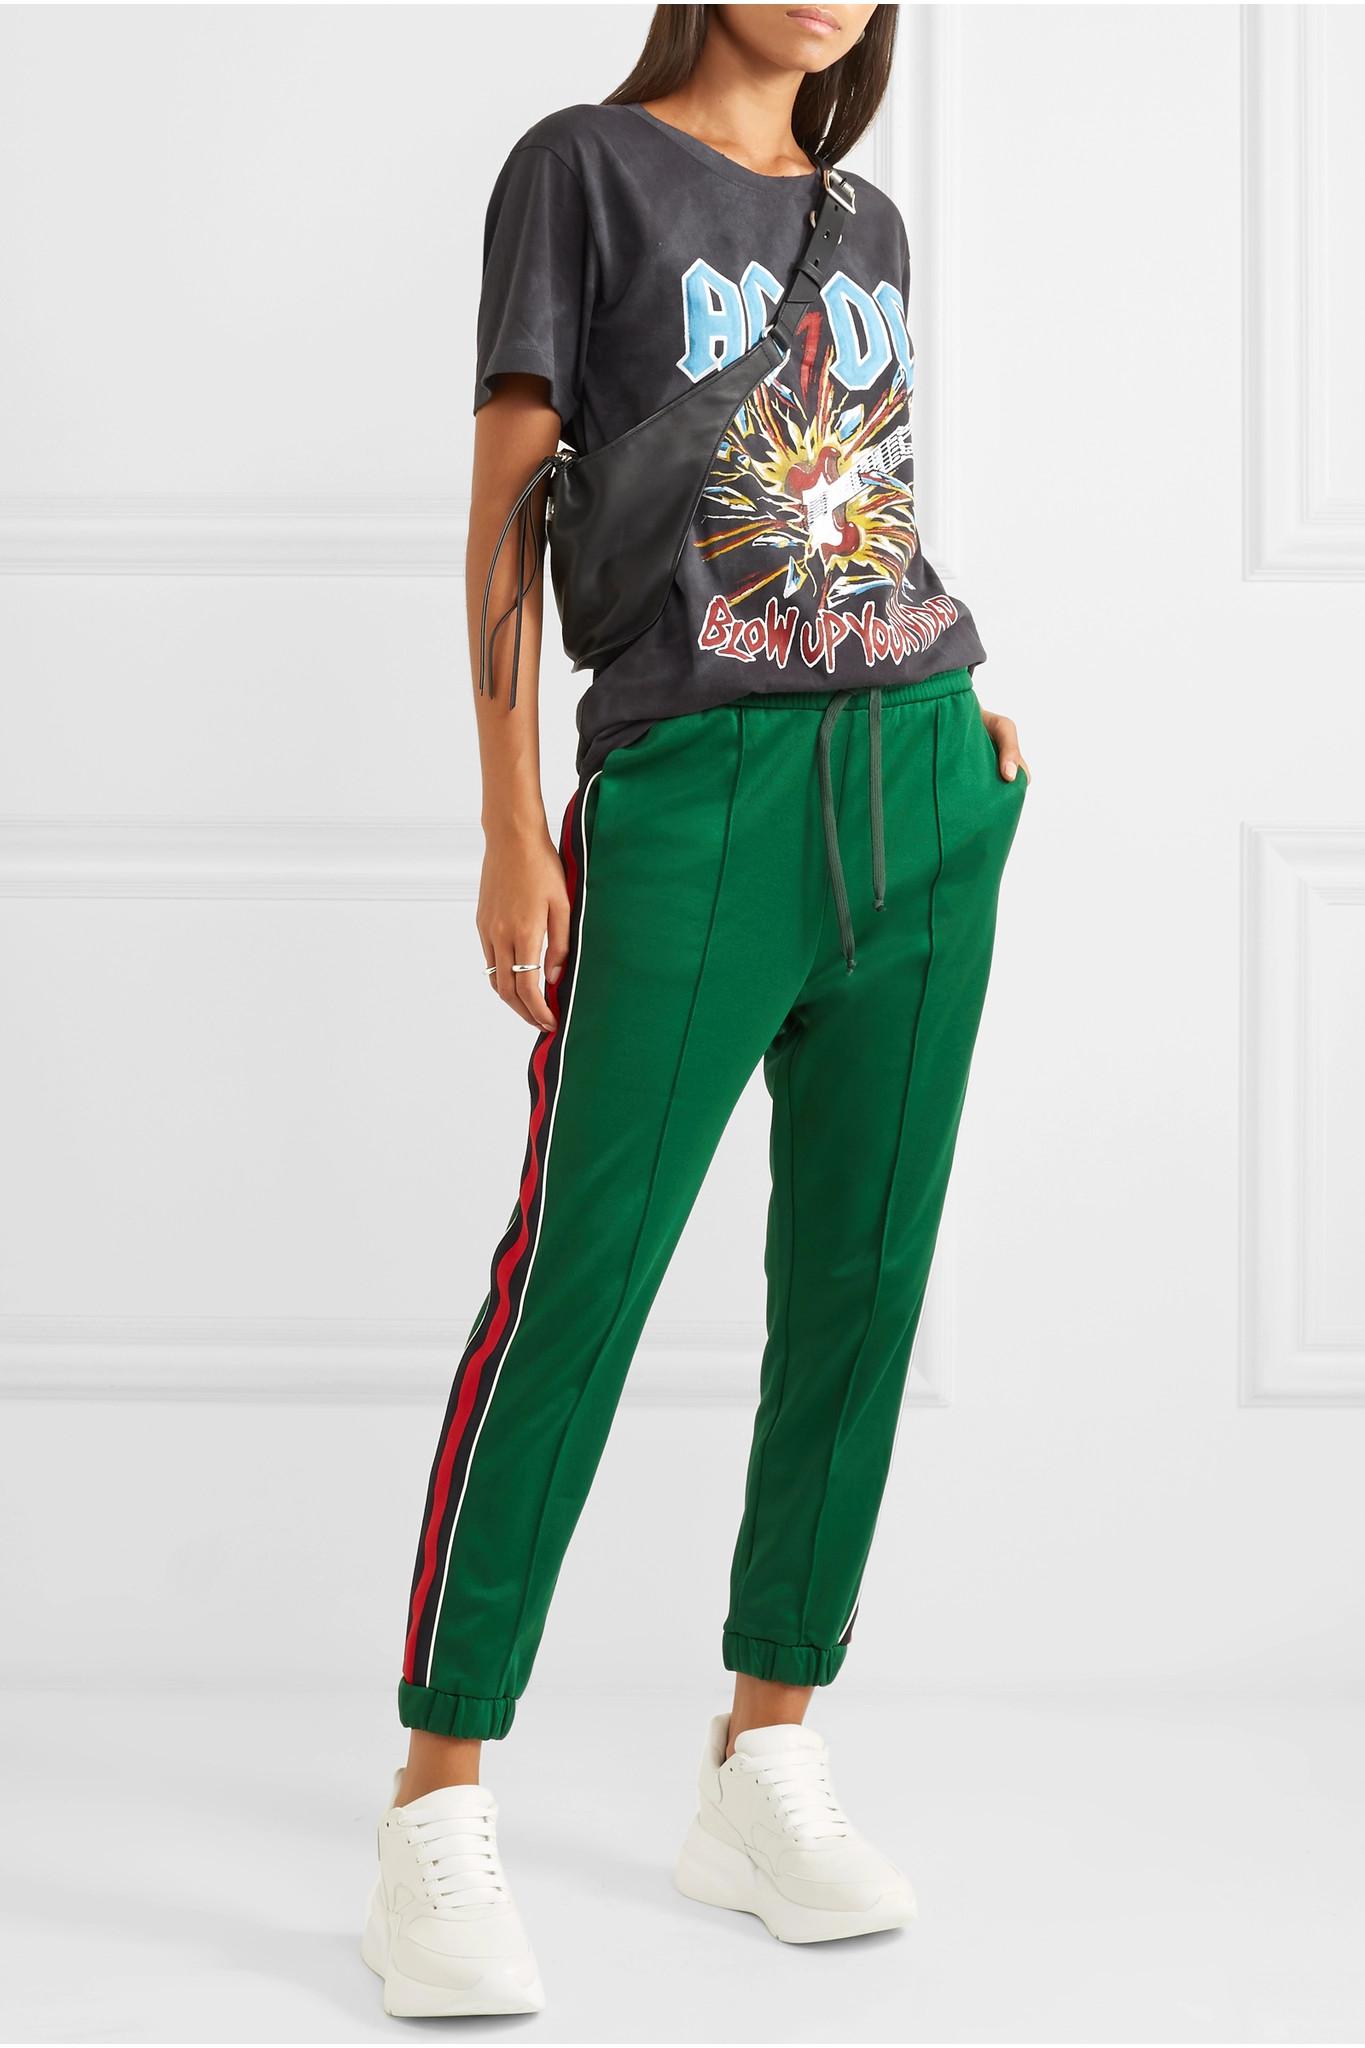 Striped Track Pants in Green - Lyst